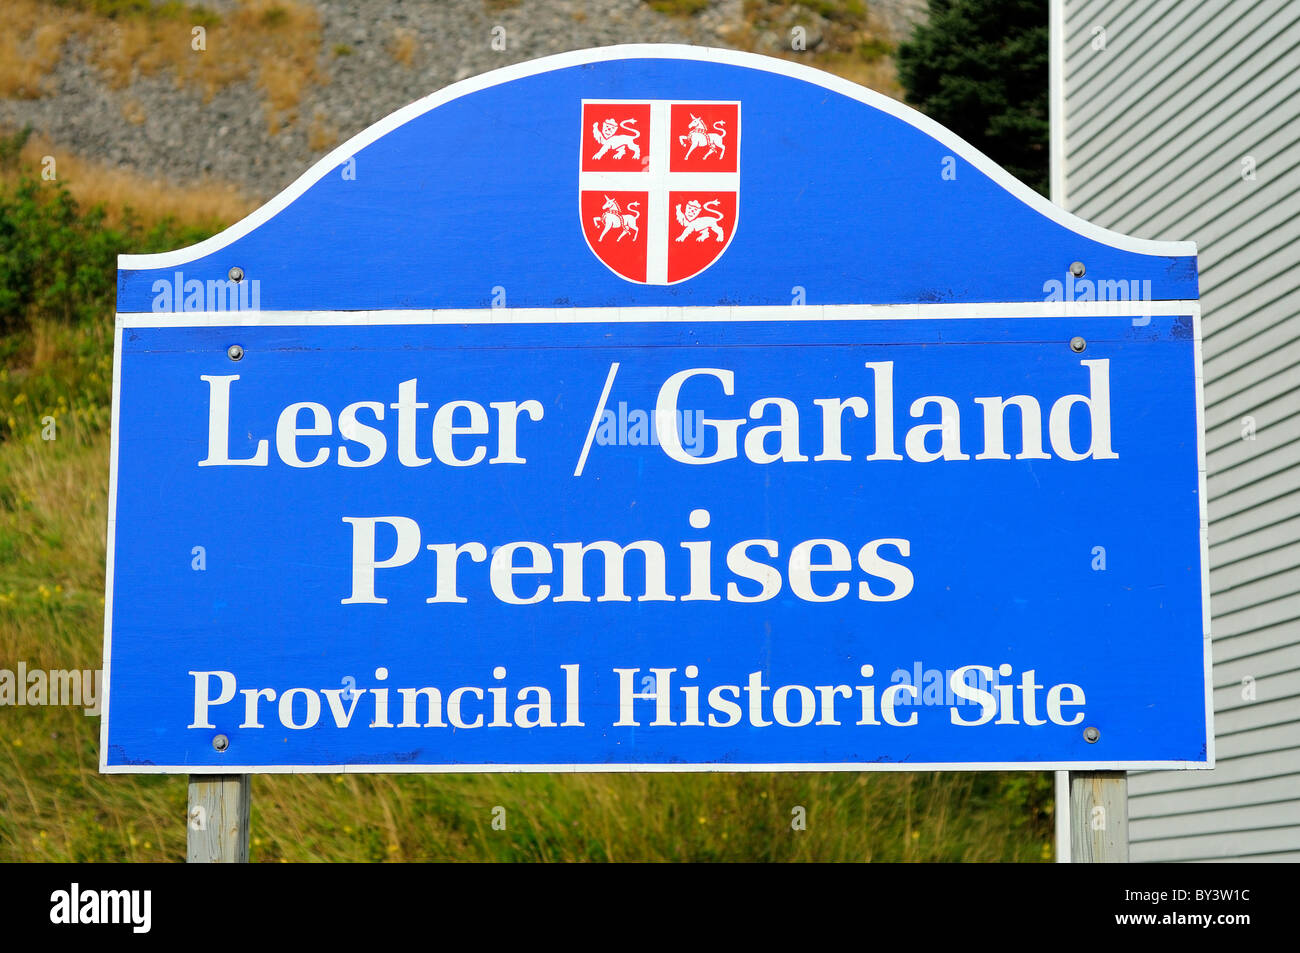 Provincial Historic Site Sign For The Lester Garland Premises Trinity Newfoundland Canada Stock Photo